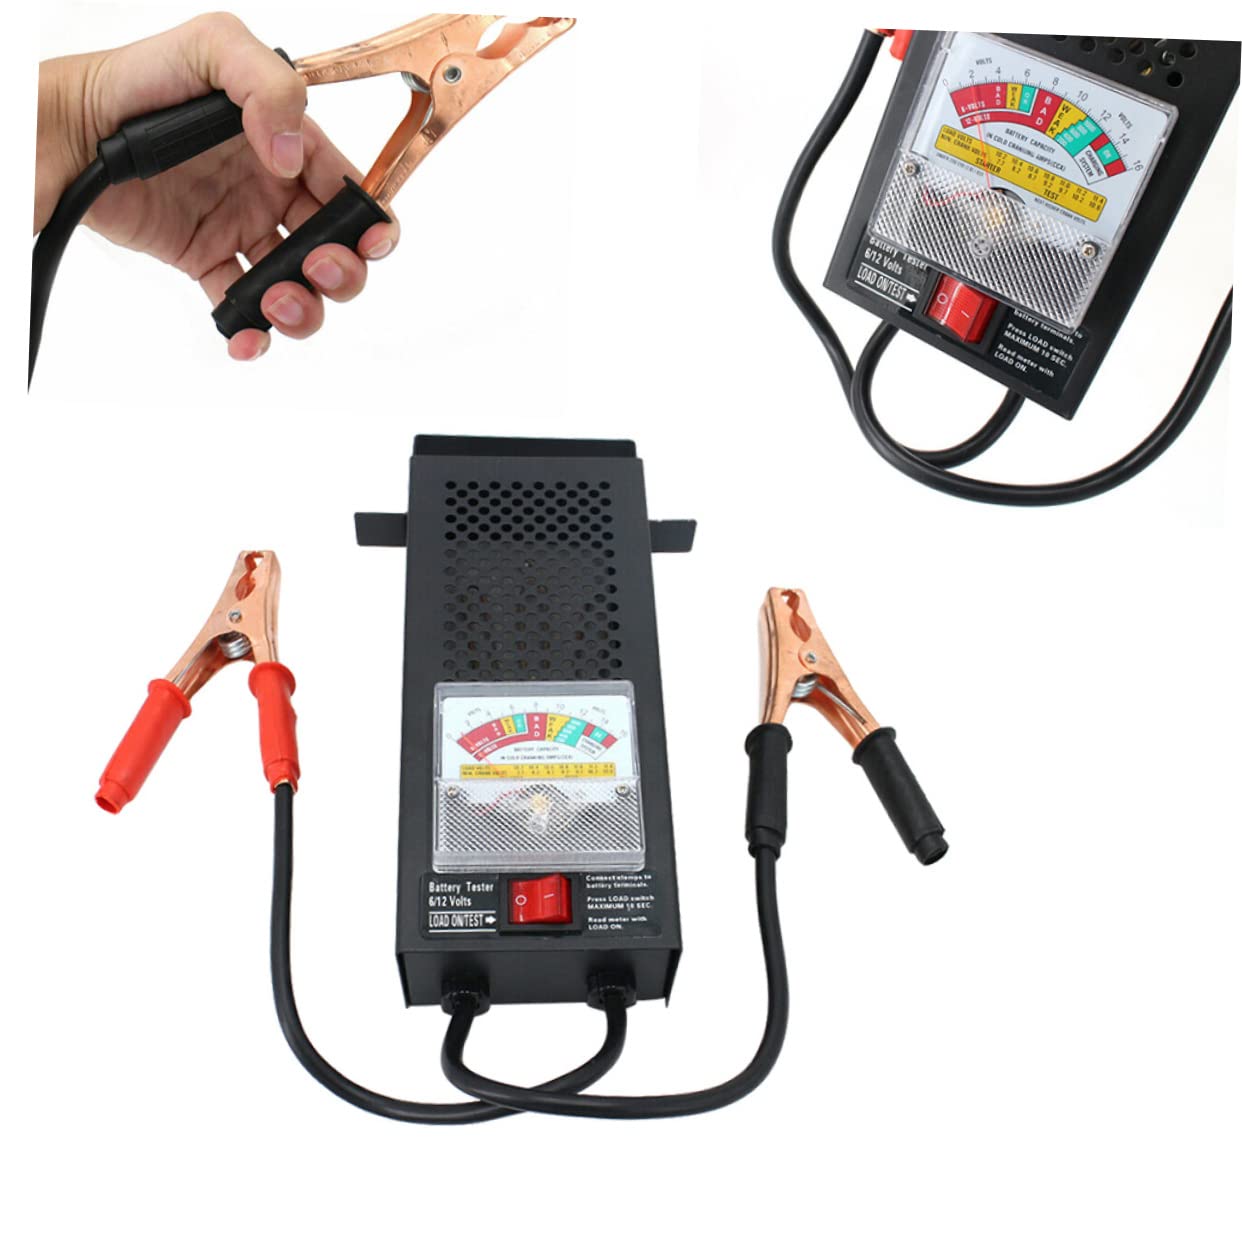 6V/12V 100AMP Car Battery Load Alternator Tester Featuring Voltmeter and Alligator Clips - Ideal for All Battery Types in Cars, RVs, Motorcycles, ATVs, and Boats - Office Catch